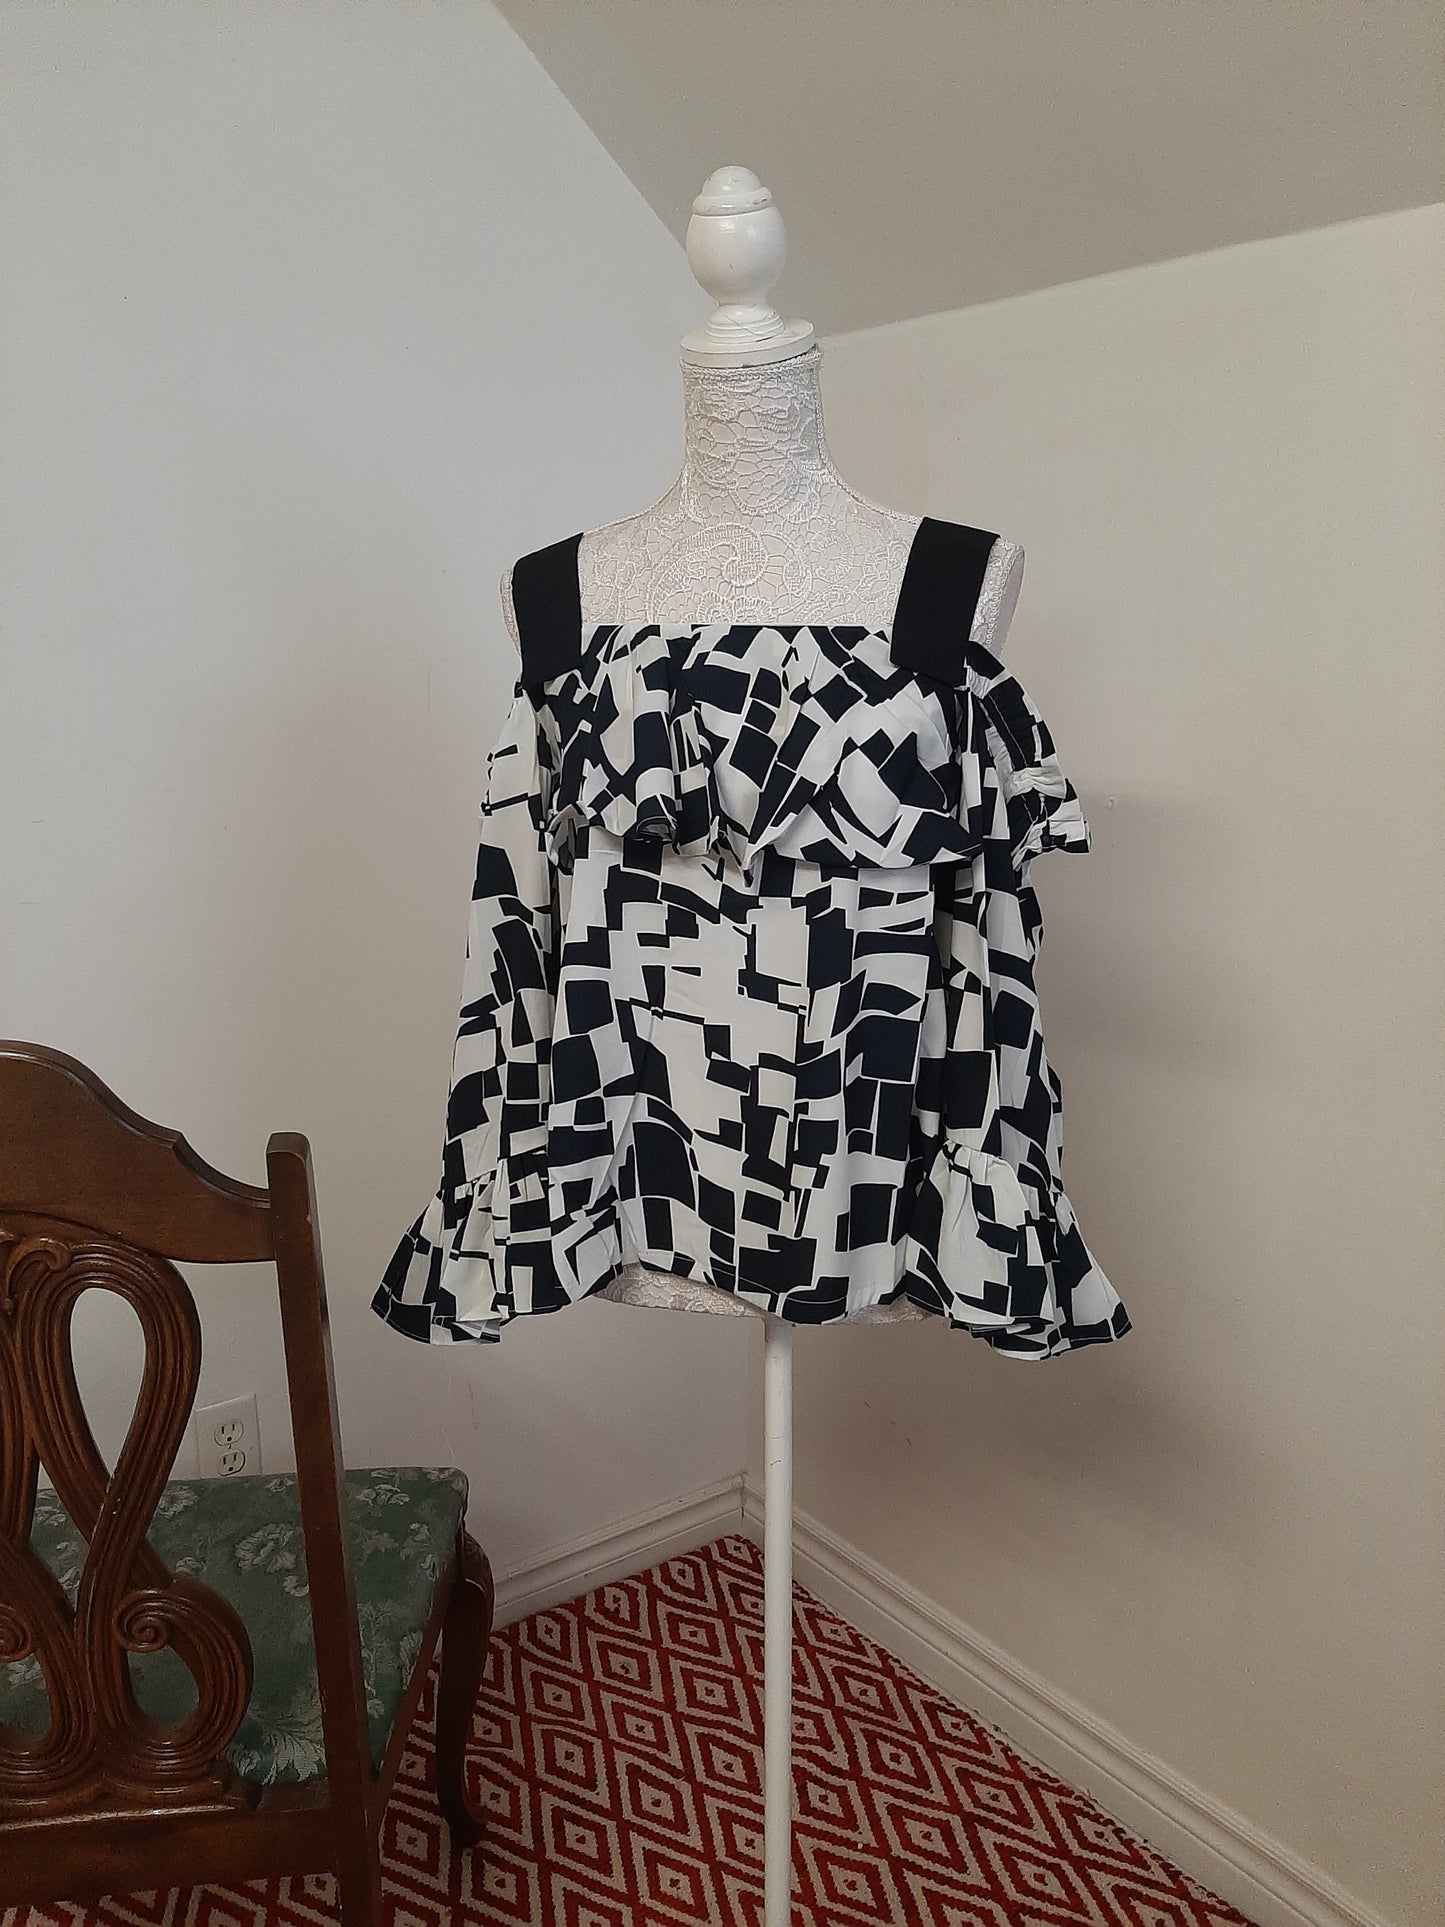 Black & White Block Abstract Print Top @ DressingStylesCA.com